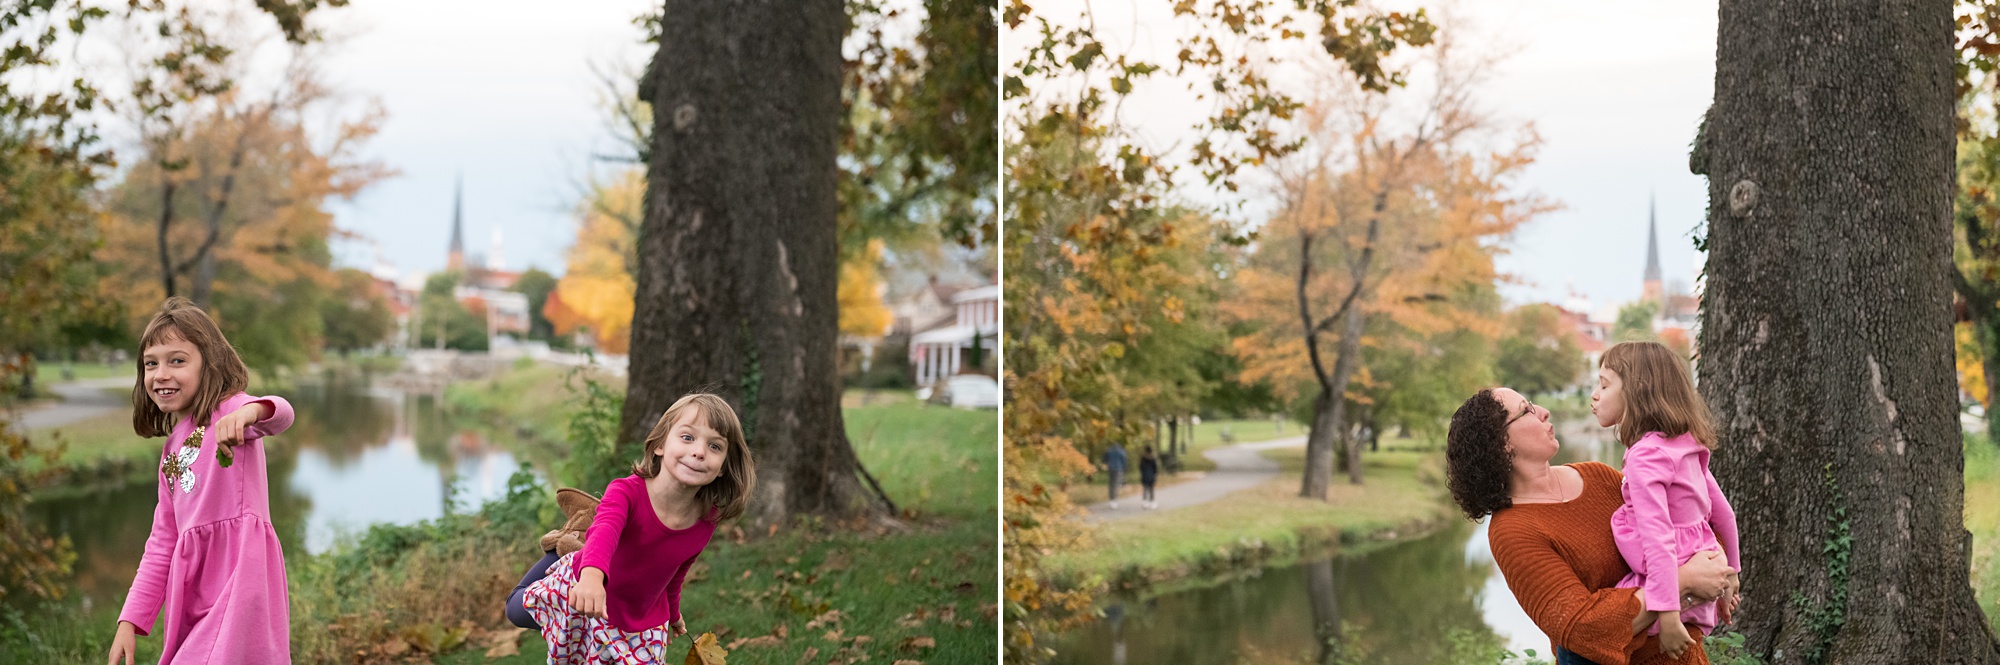 Downtown Frederick portraits in Maryland with Wendy Zook